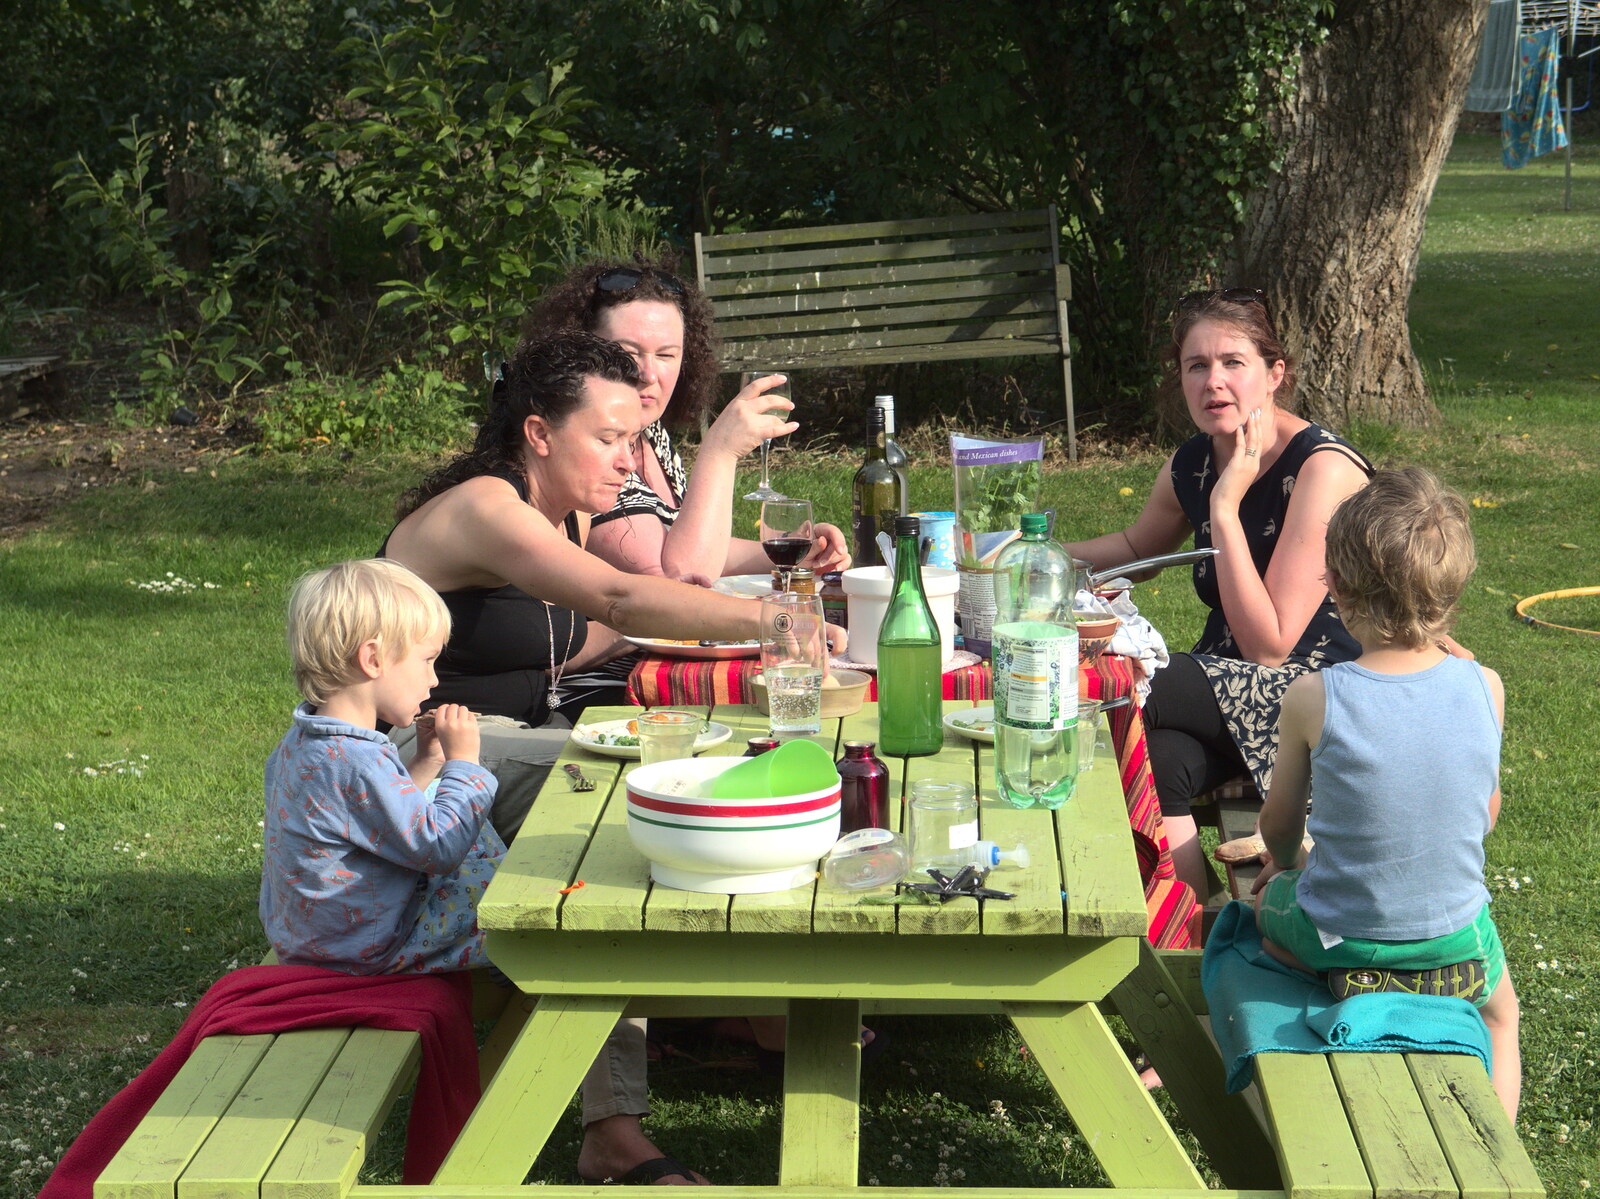 Time for tea in the back garden from A visit from Da Gorls, Brome, Suffolk - 27th June 2015